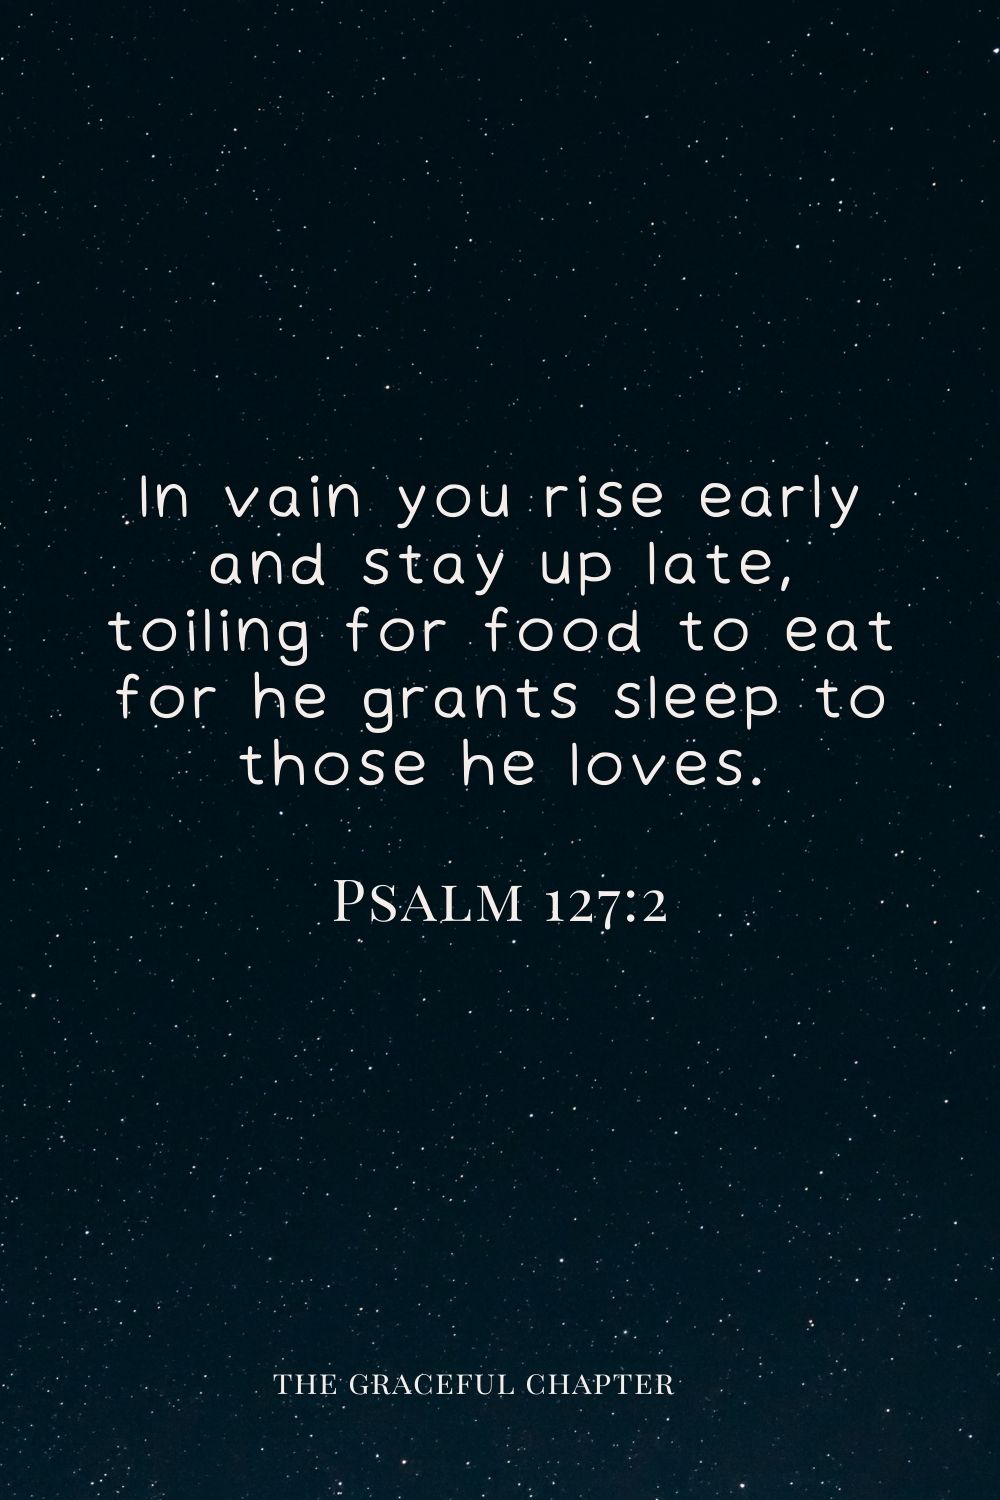 In vain you rise early and stay up late, toiling for food to eat for he grants sleep to those he loves. Psalm 127:2